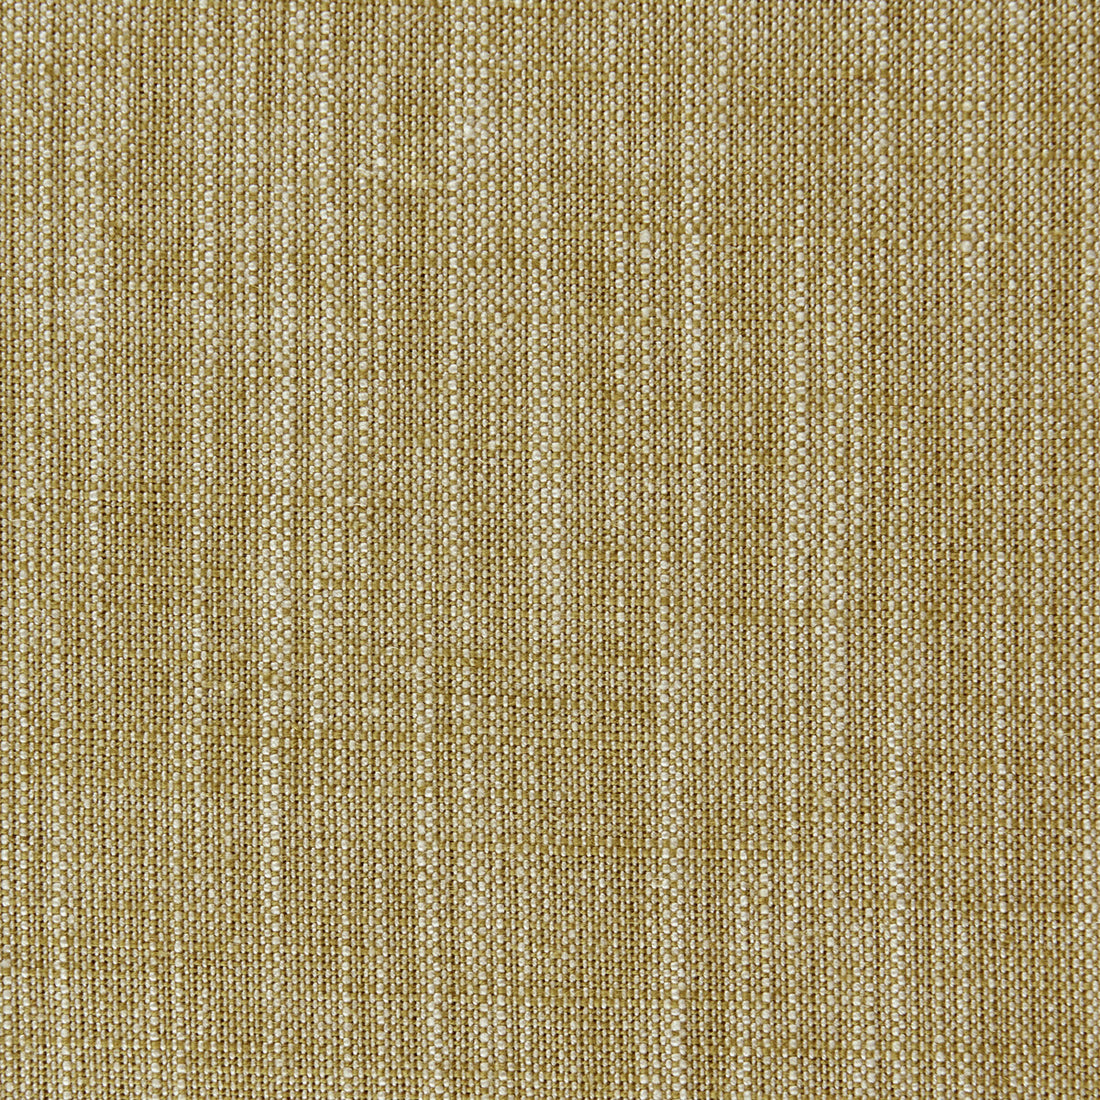 Biarritz fabric in antique color - pattern F0965/02.CAC.0 - by Clarke And Clarke in the Clarke &amp; Clarke Biarritz collection